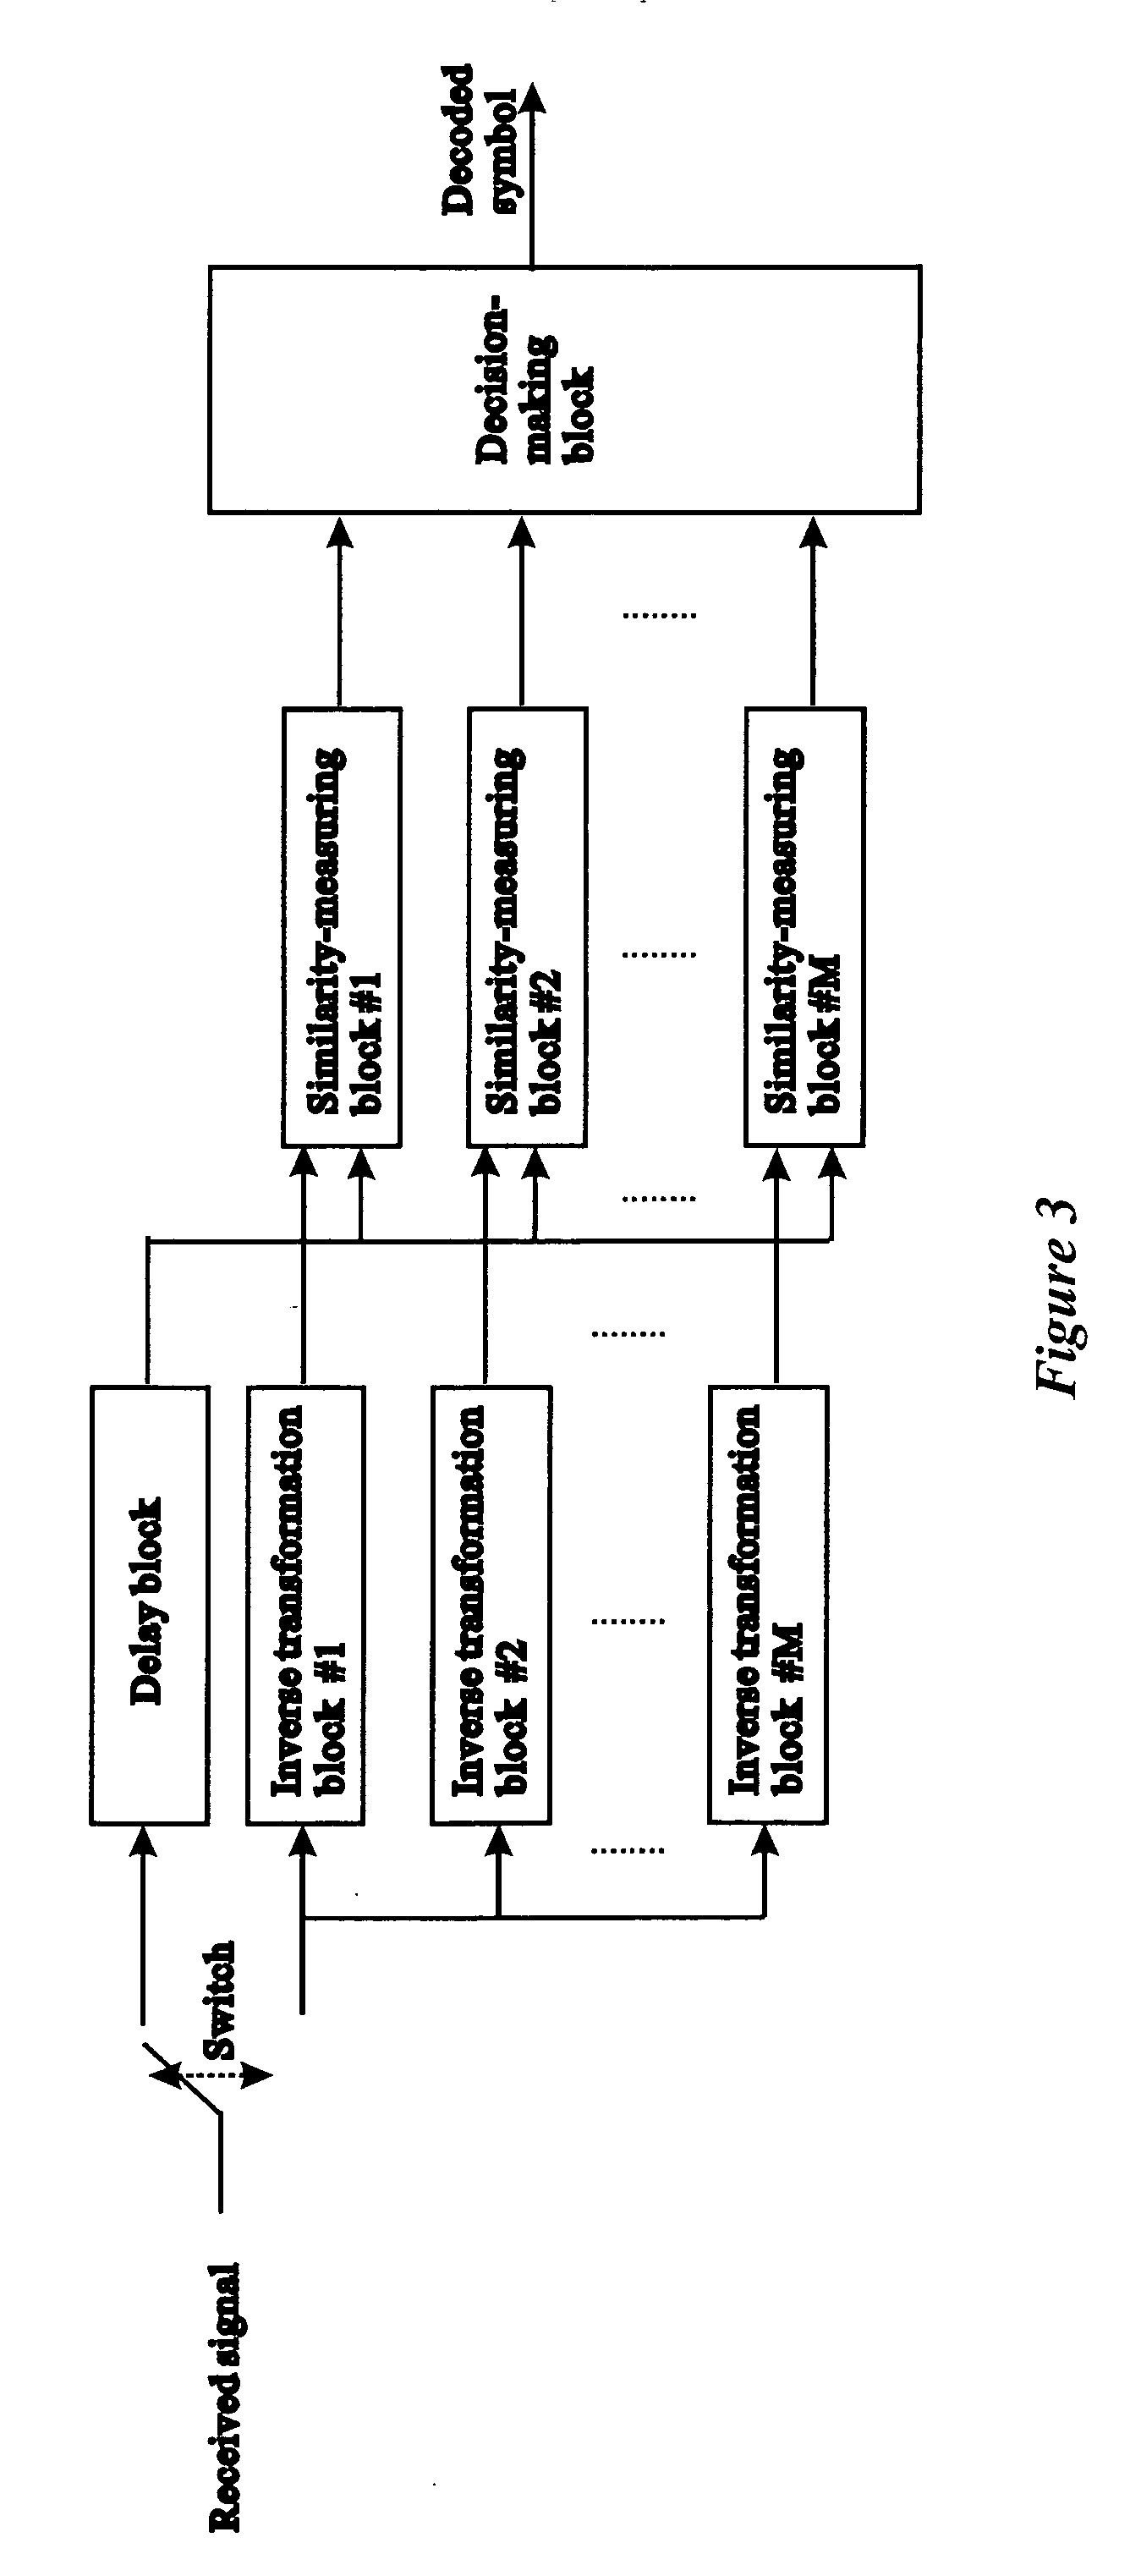 Methods and systems for transceiving chaotic signals